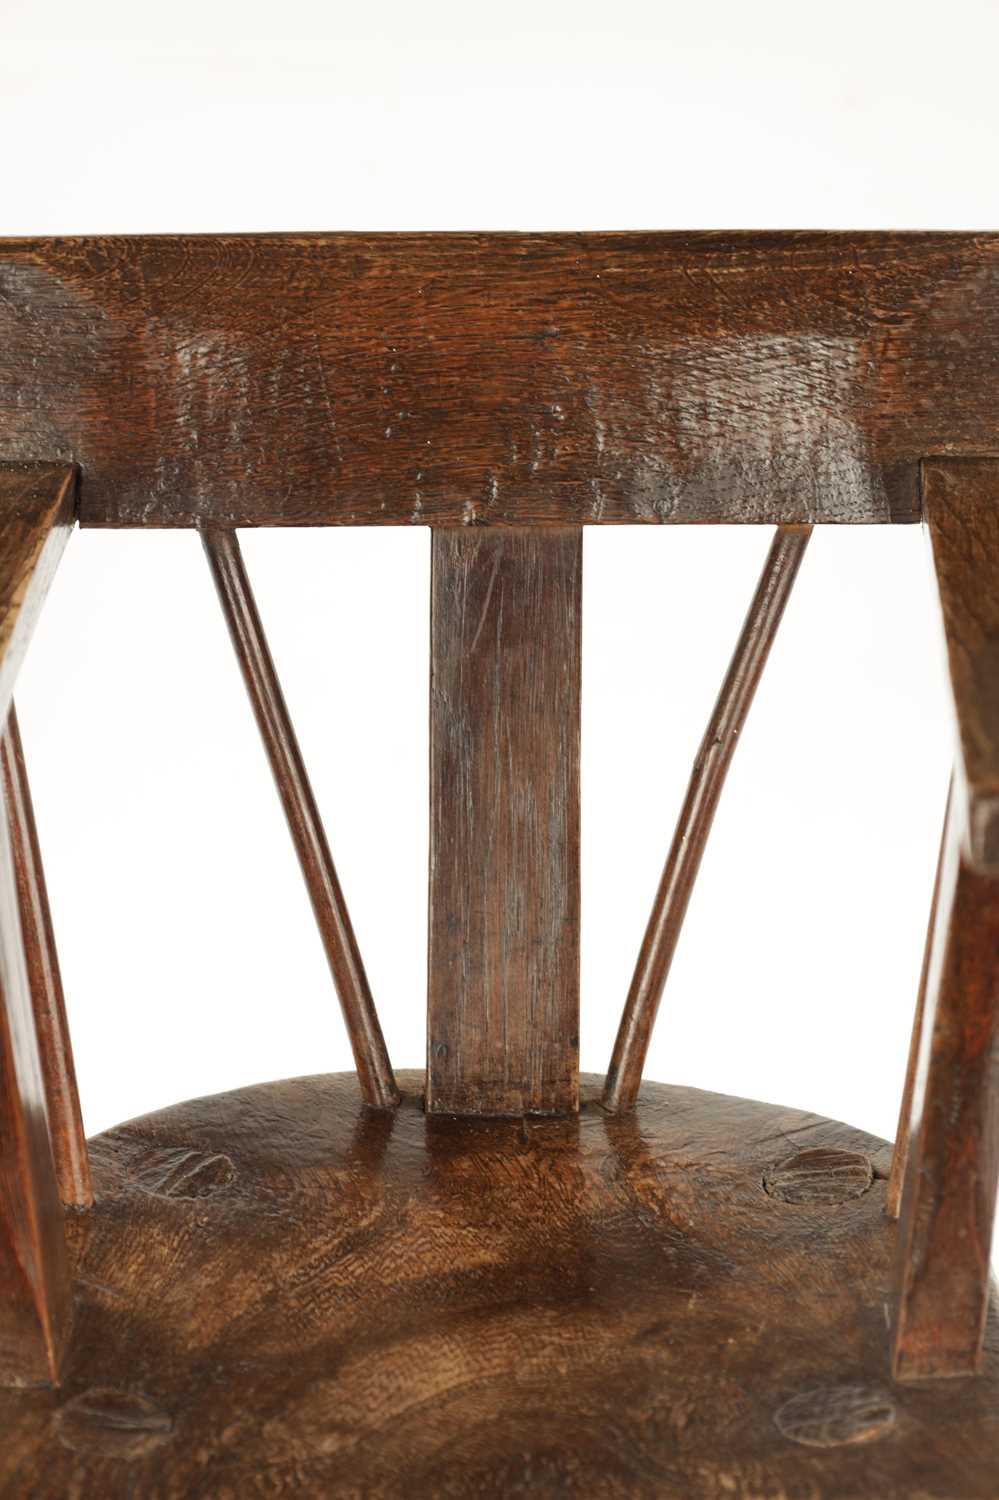 A RARE 18TH CENTURY PRIMITIVE ASH AND ELM CHILD’S CHAIR - Image 3 of 7